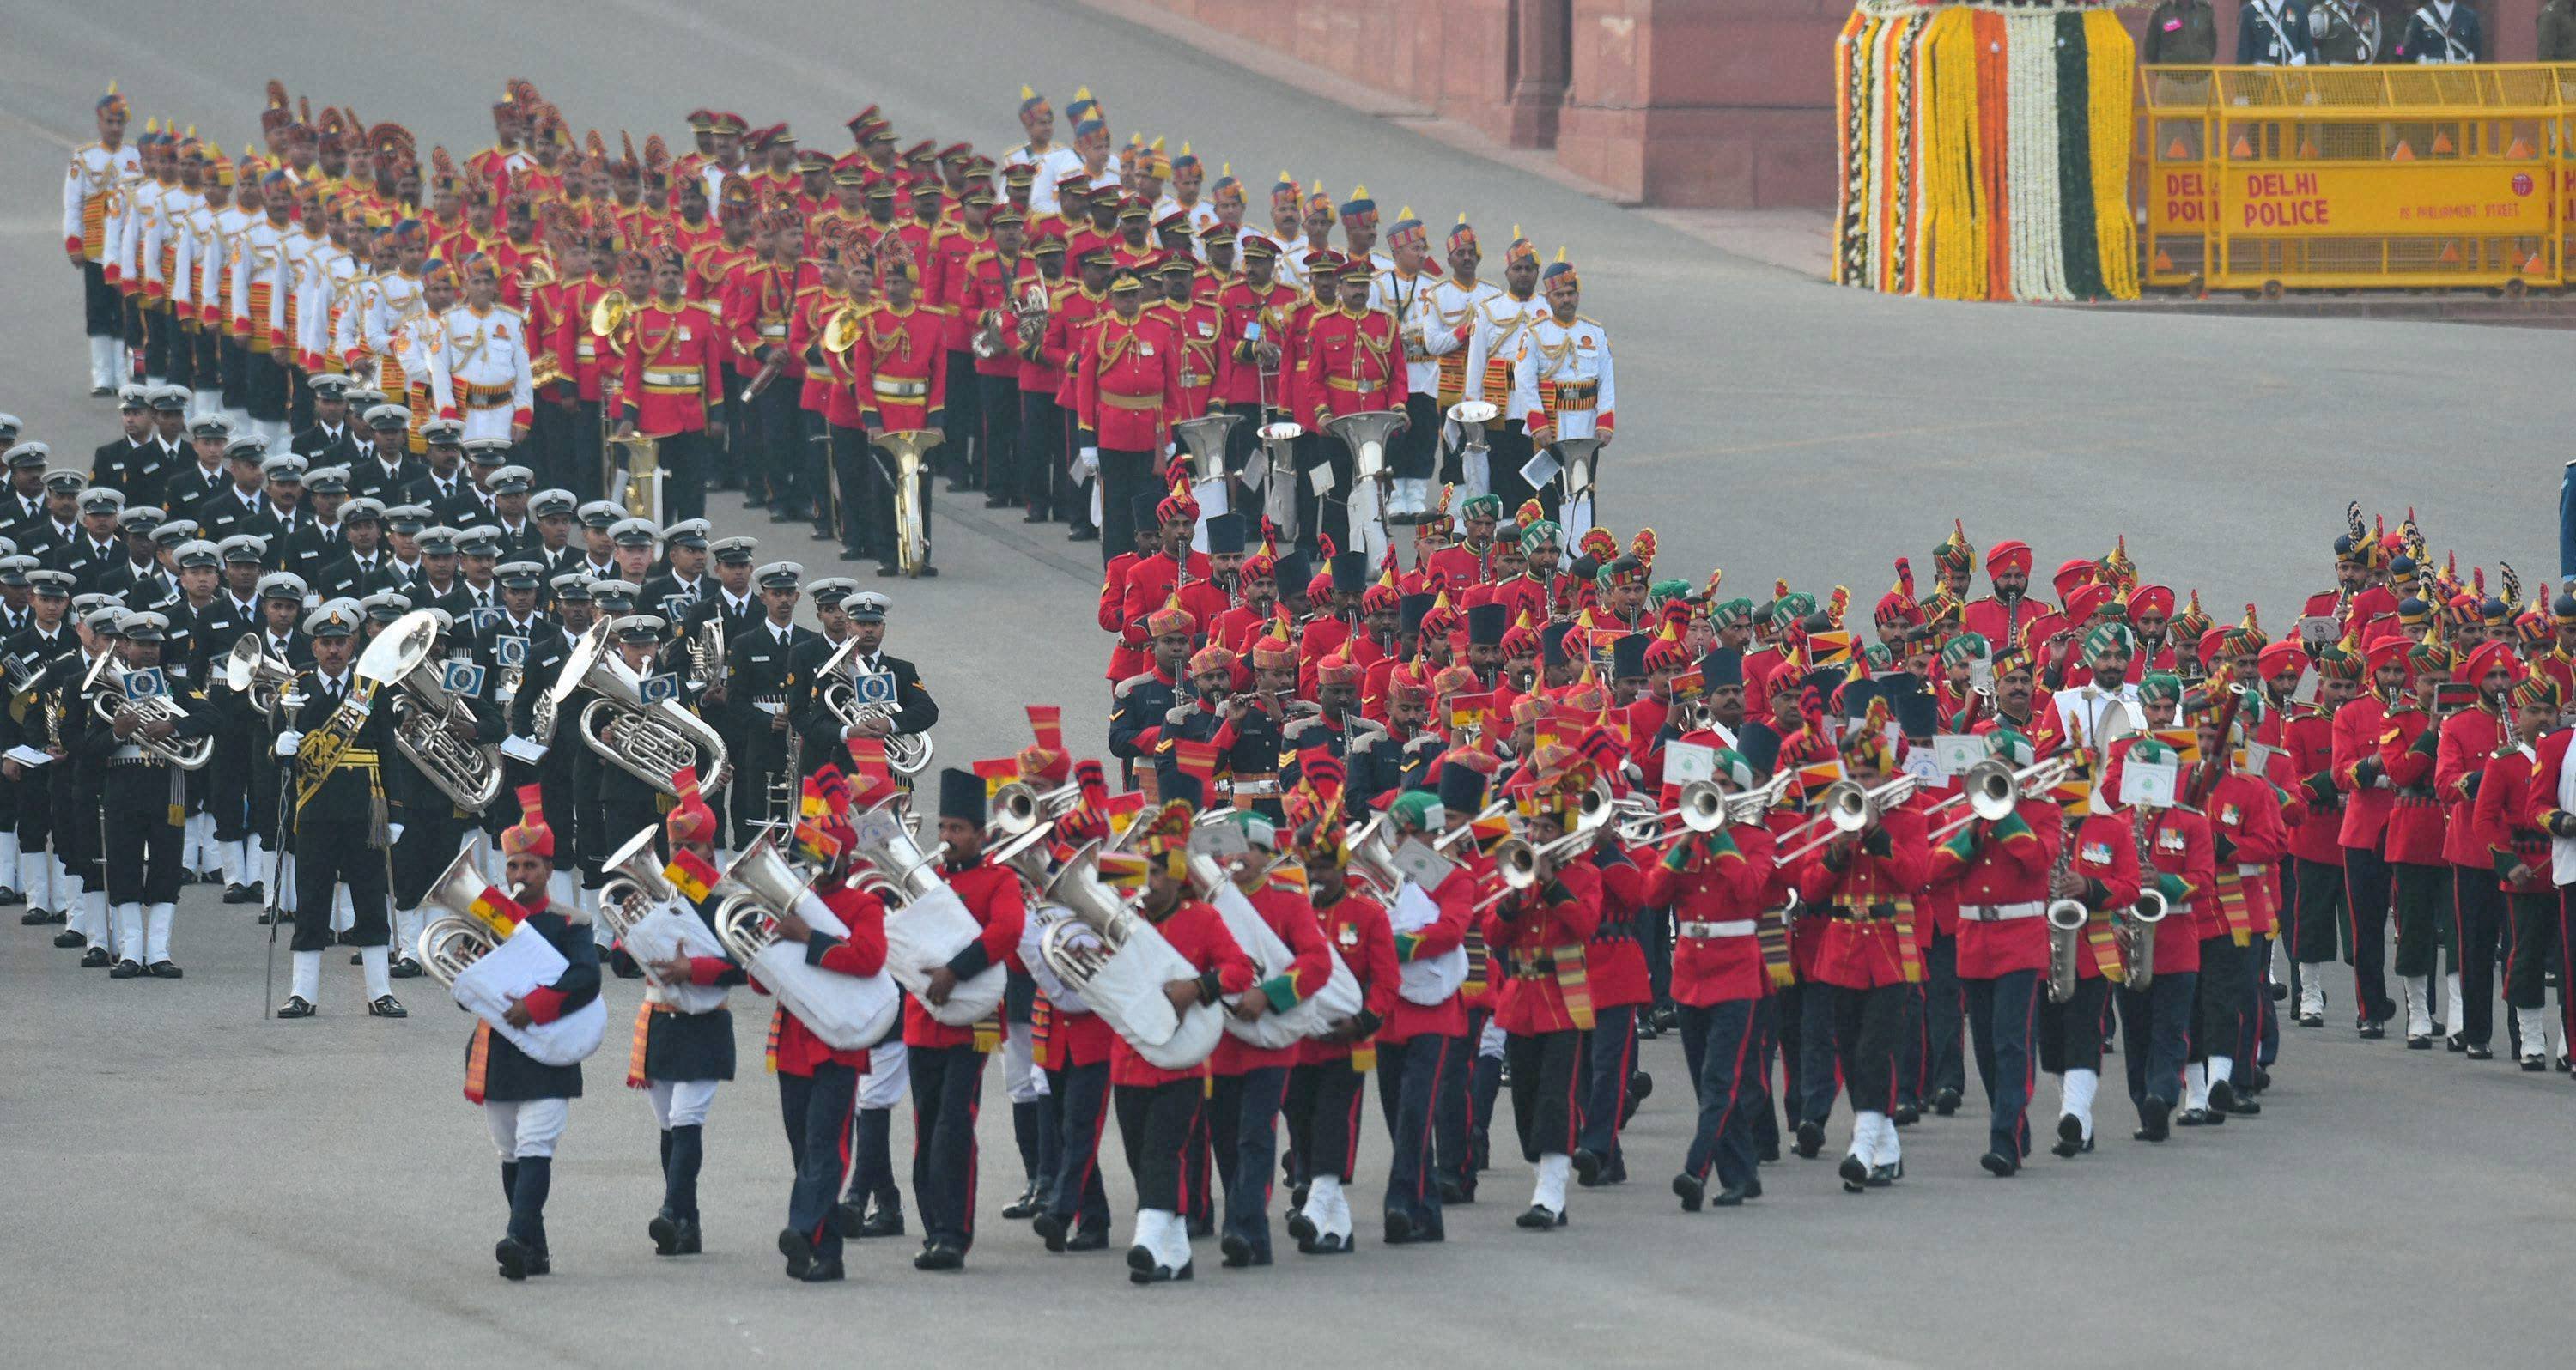 Here are 10 best photos from Beating Retreat ceremony that marked the end of Republic day